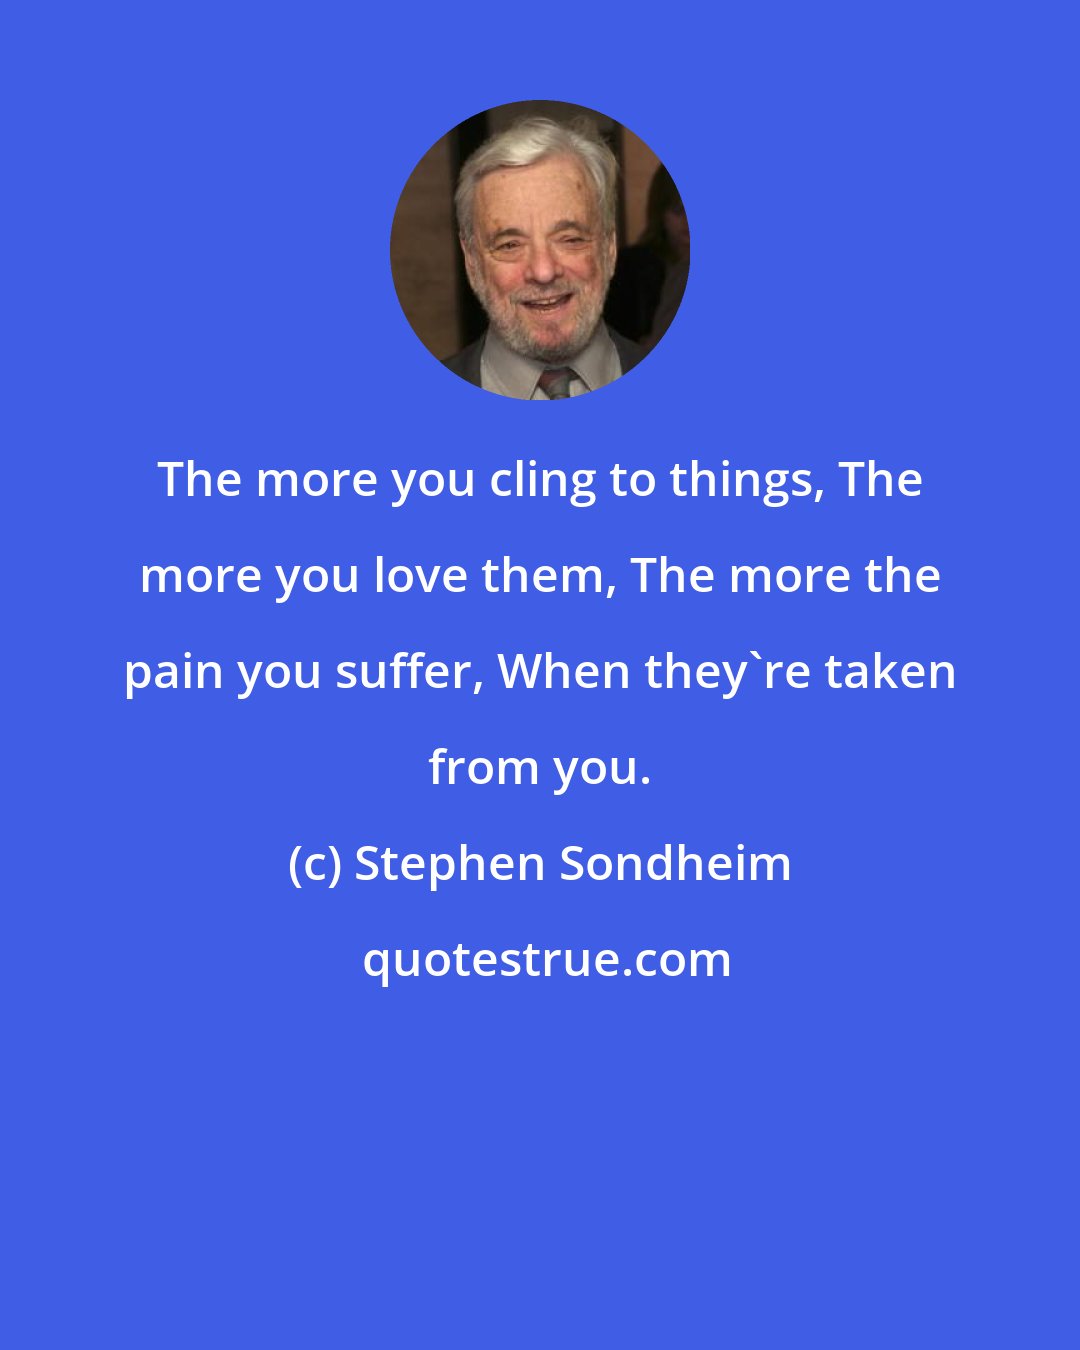 Stephen Sondheim: The more you cling to things, The more you love them, The more the pain you suffer, When they're taken from you.